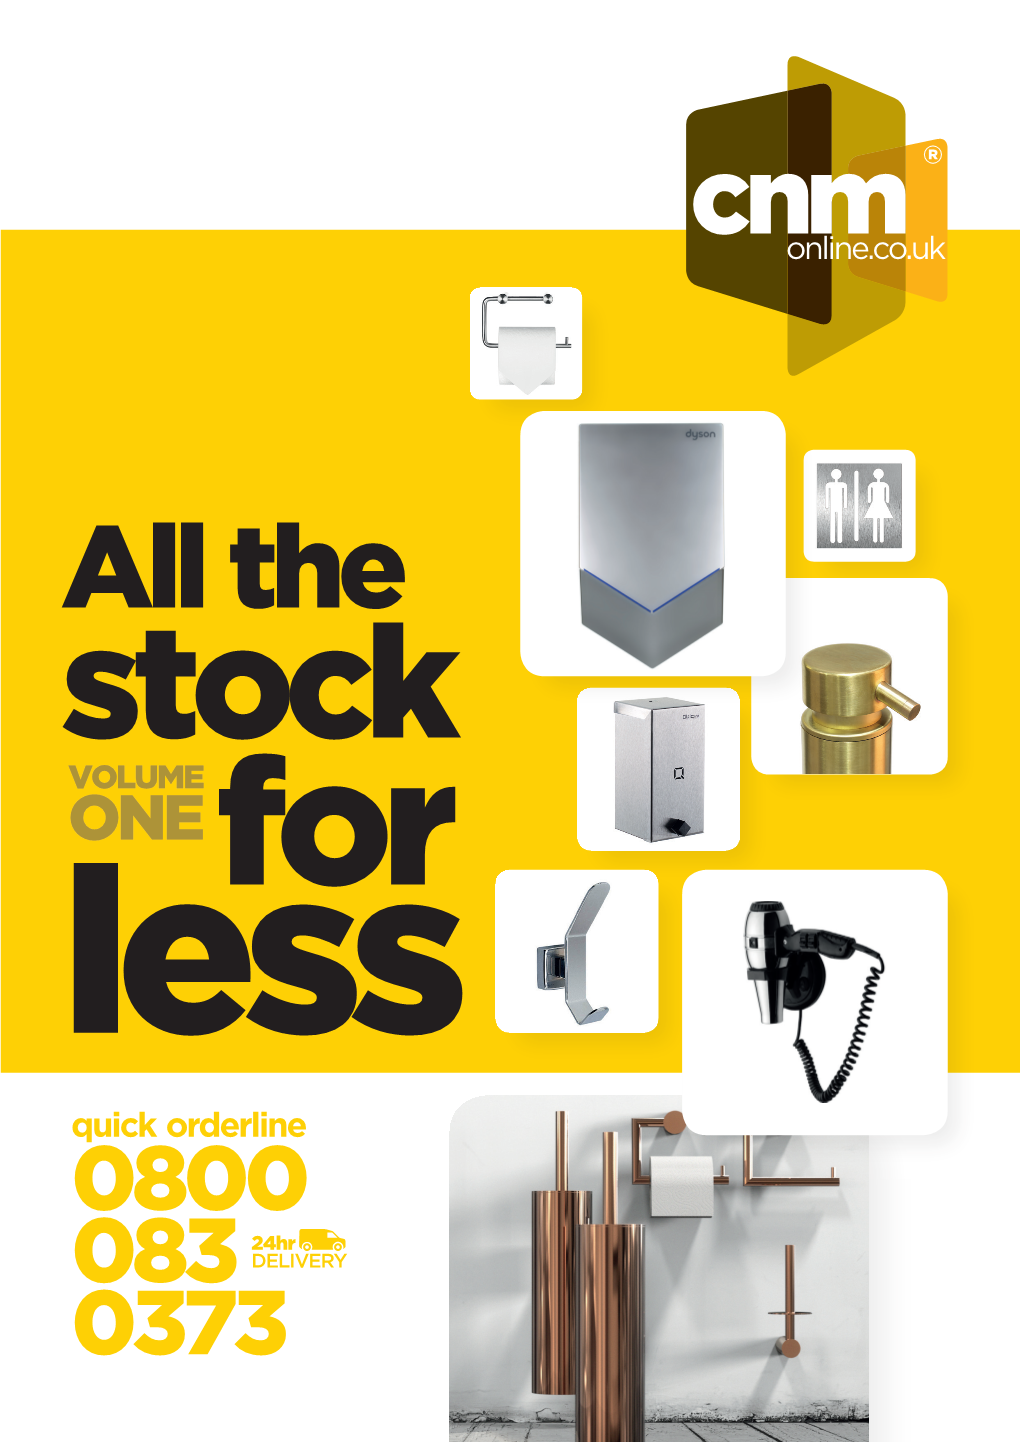 All the Stock VOLUME ONE for Less Quick Orderline 0800 24Hr 083 DELIVERY 0373 HAIR & HAND DRYERS